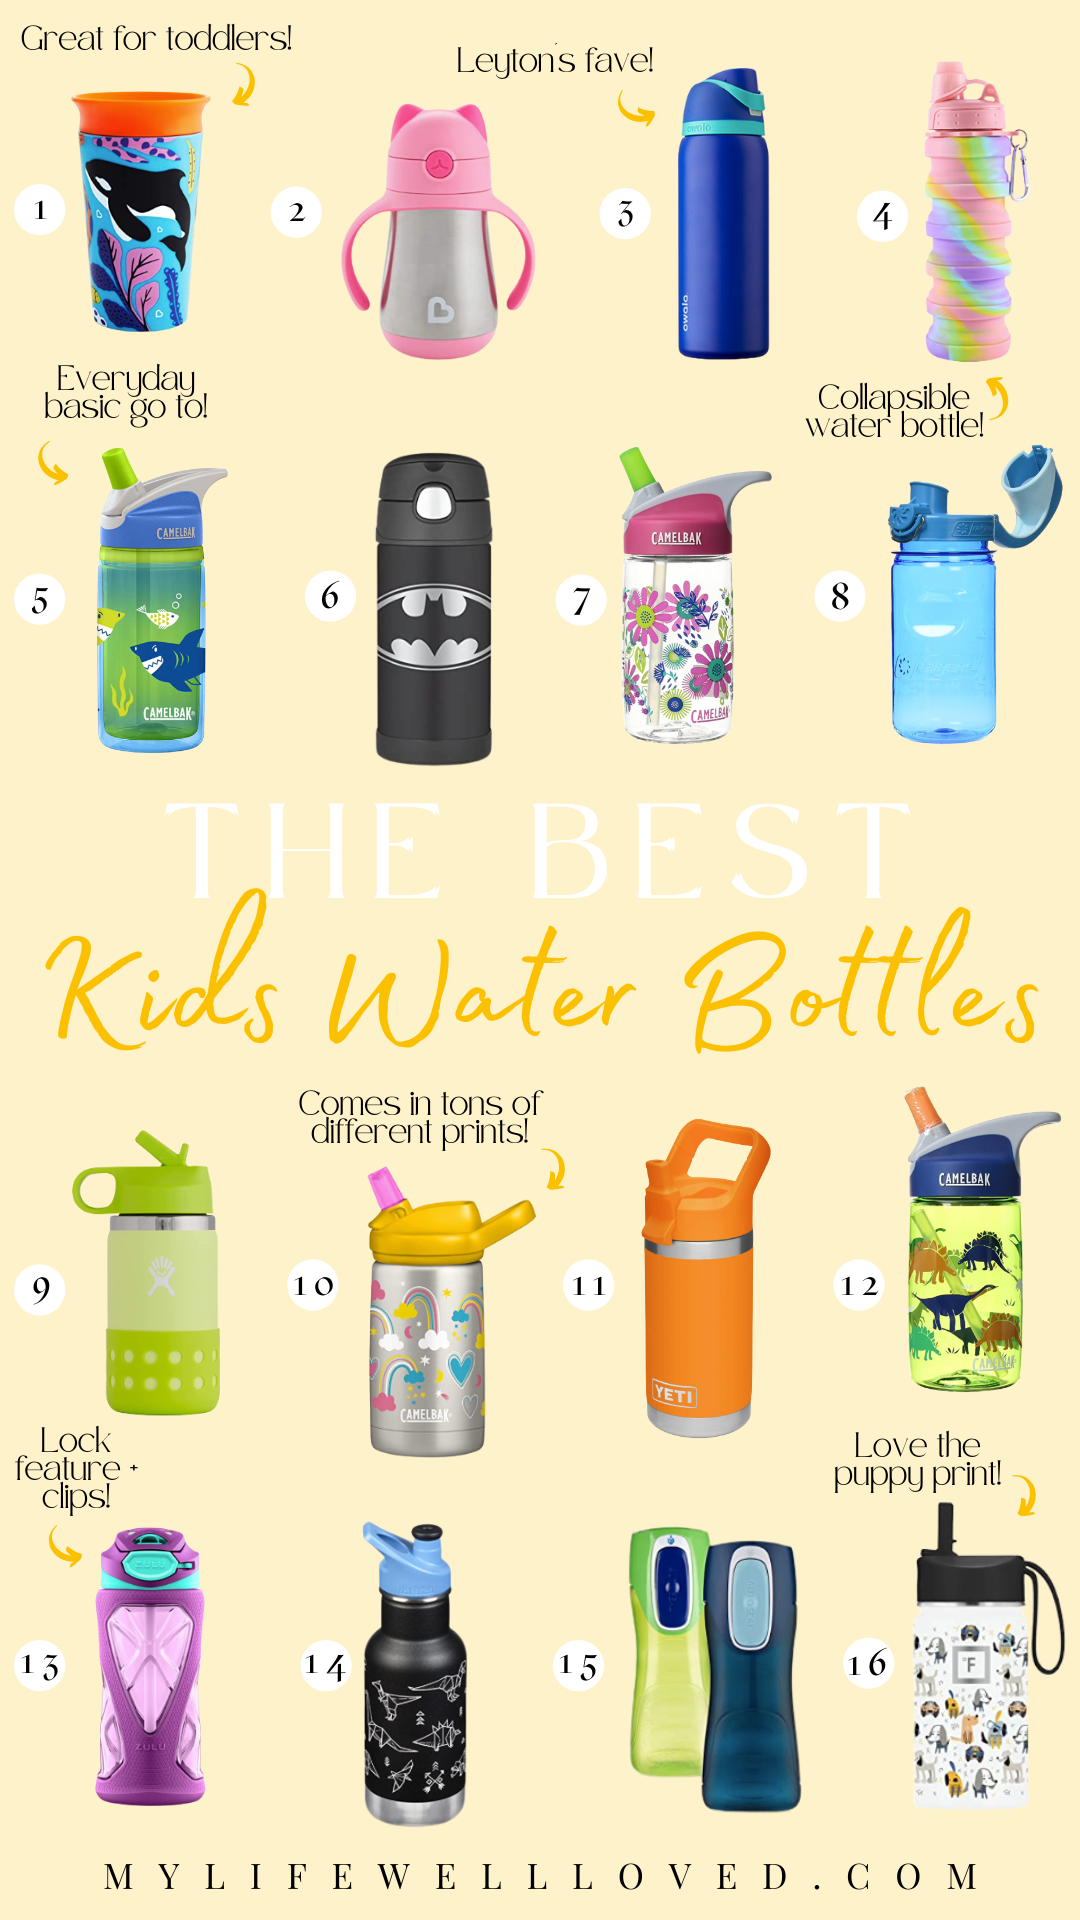 https://www.mylifewellloved.com/wp-content/uploads/kids-water-bottle-1.png